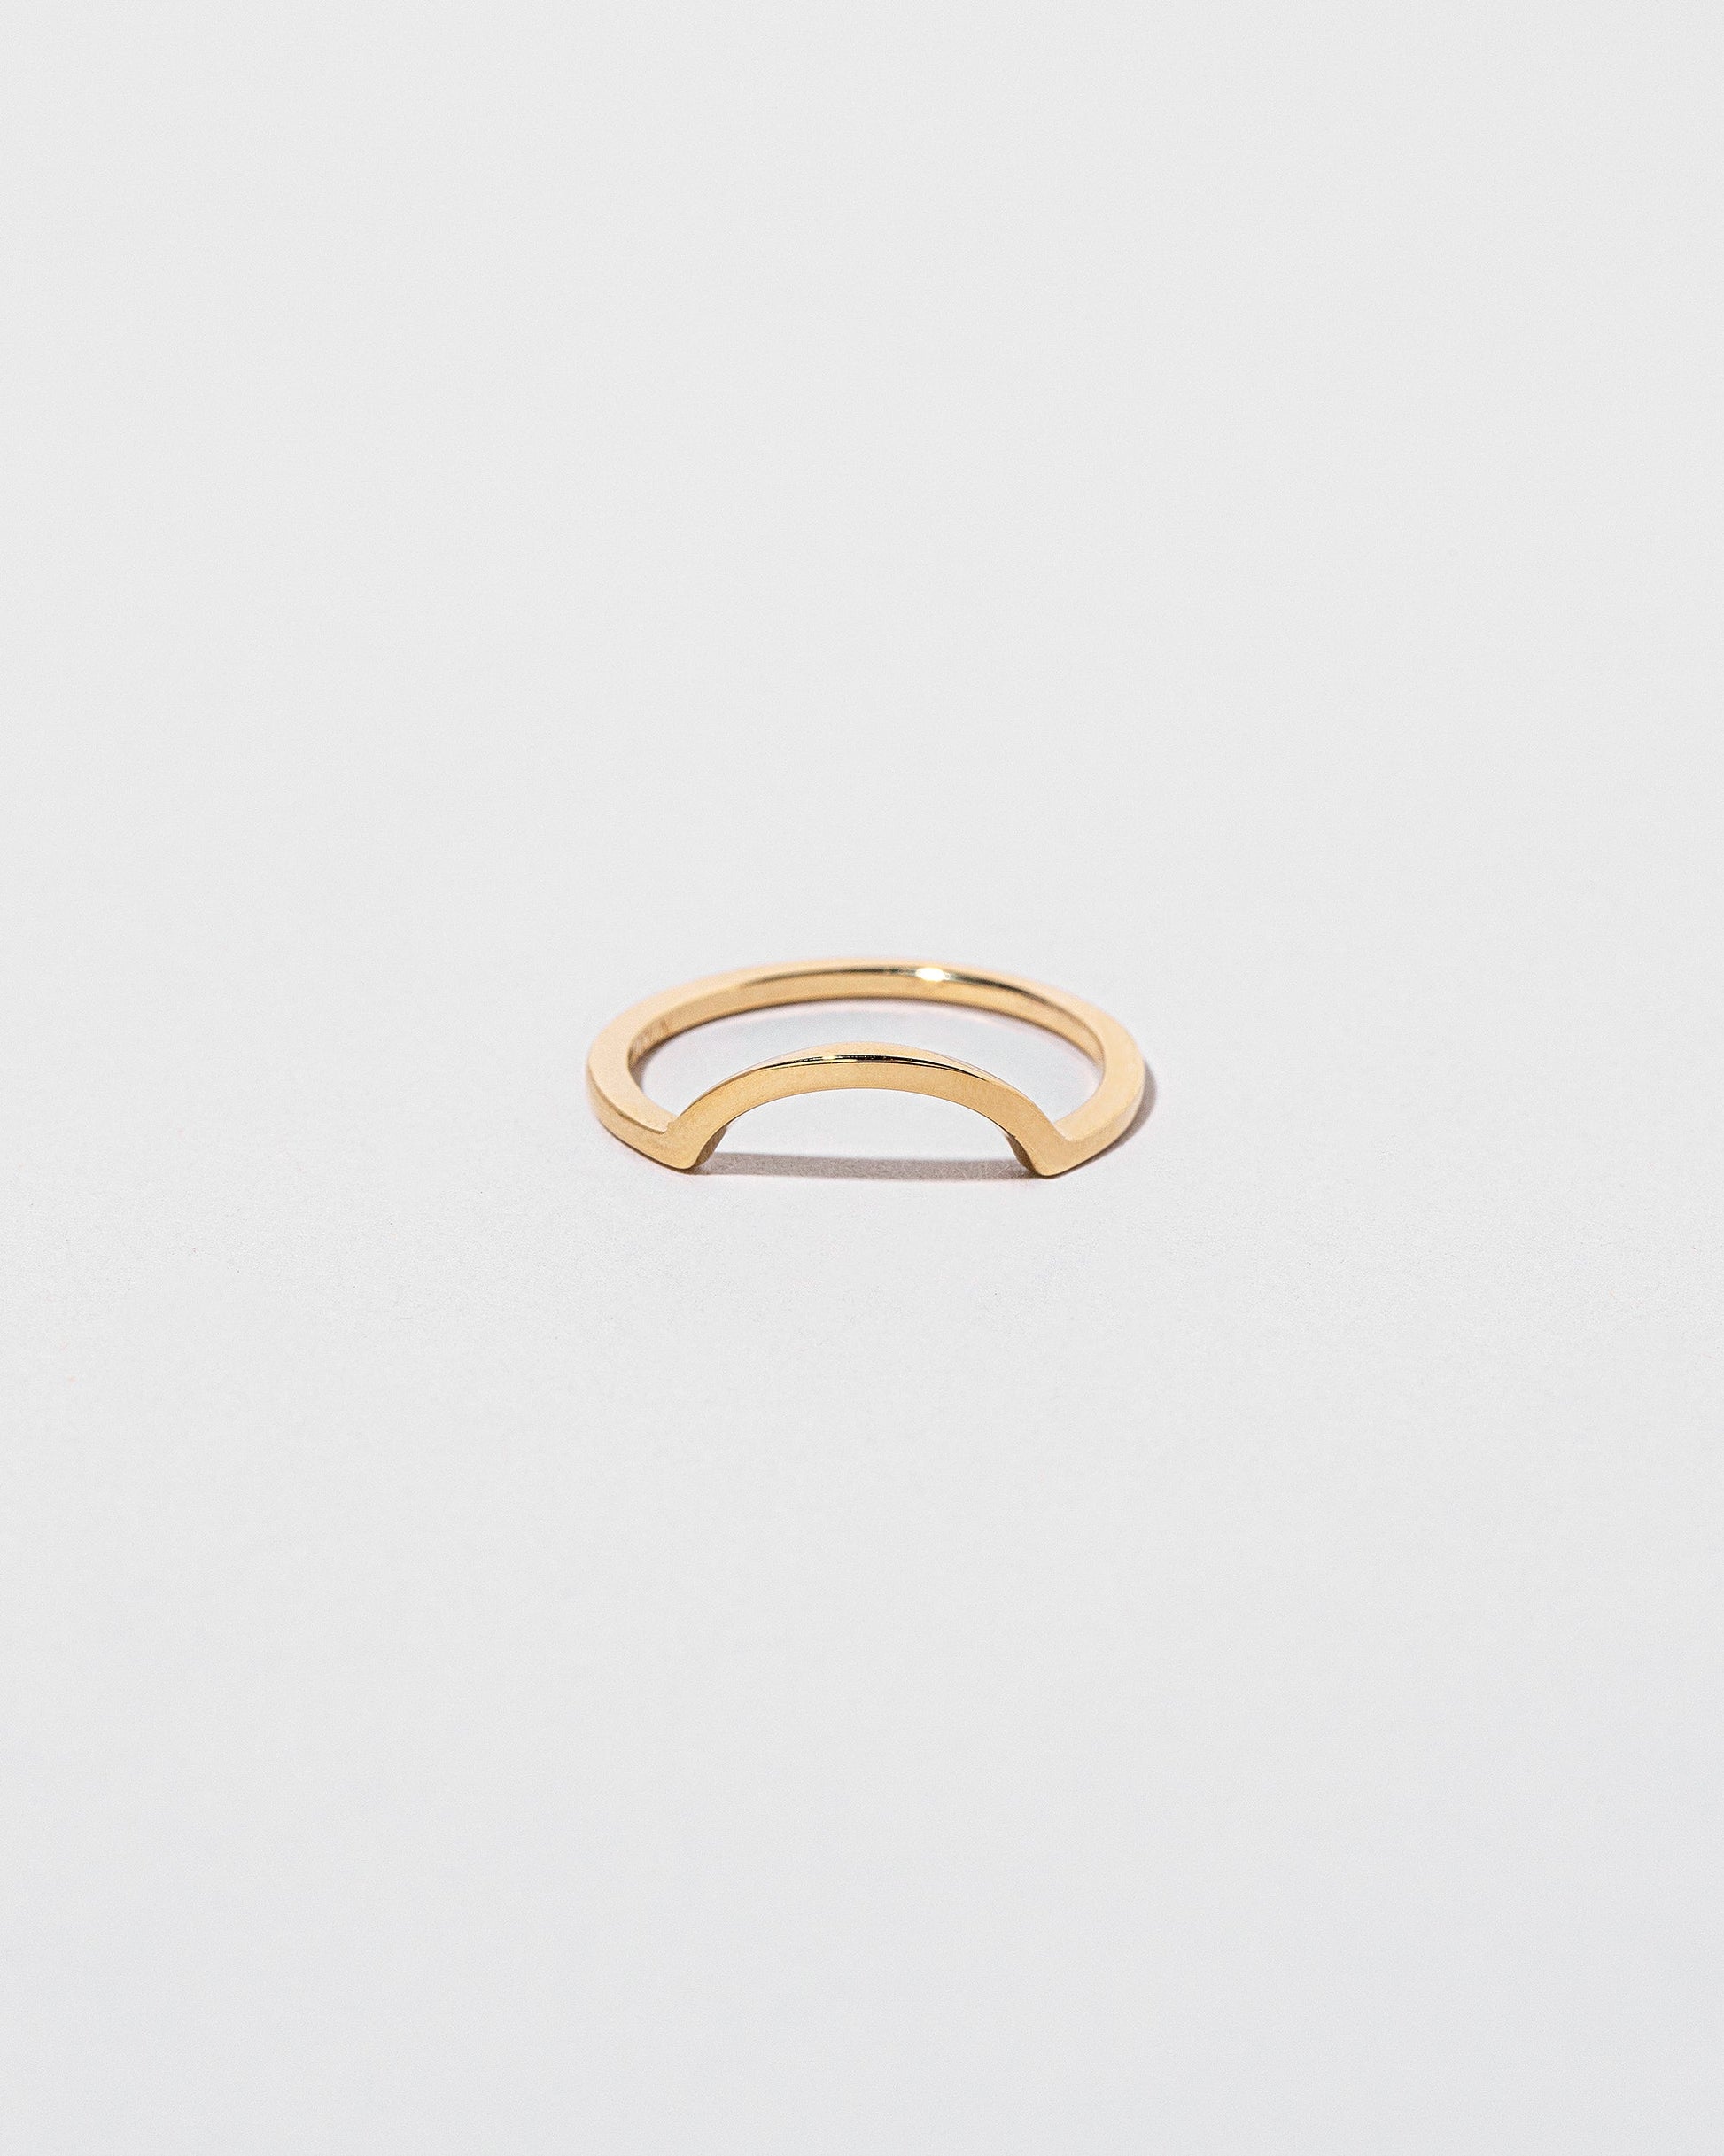 Gold Square Wire Curve Band on light color background.